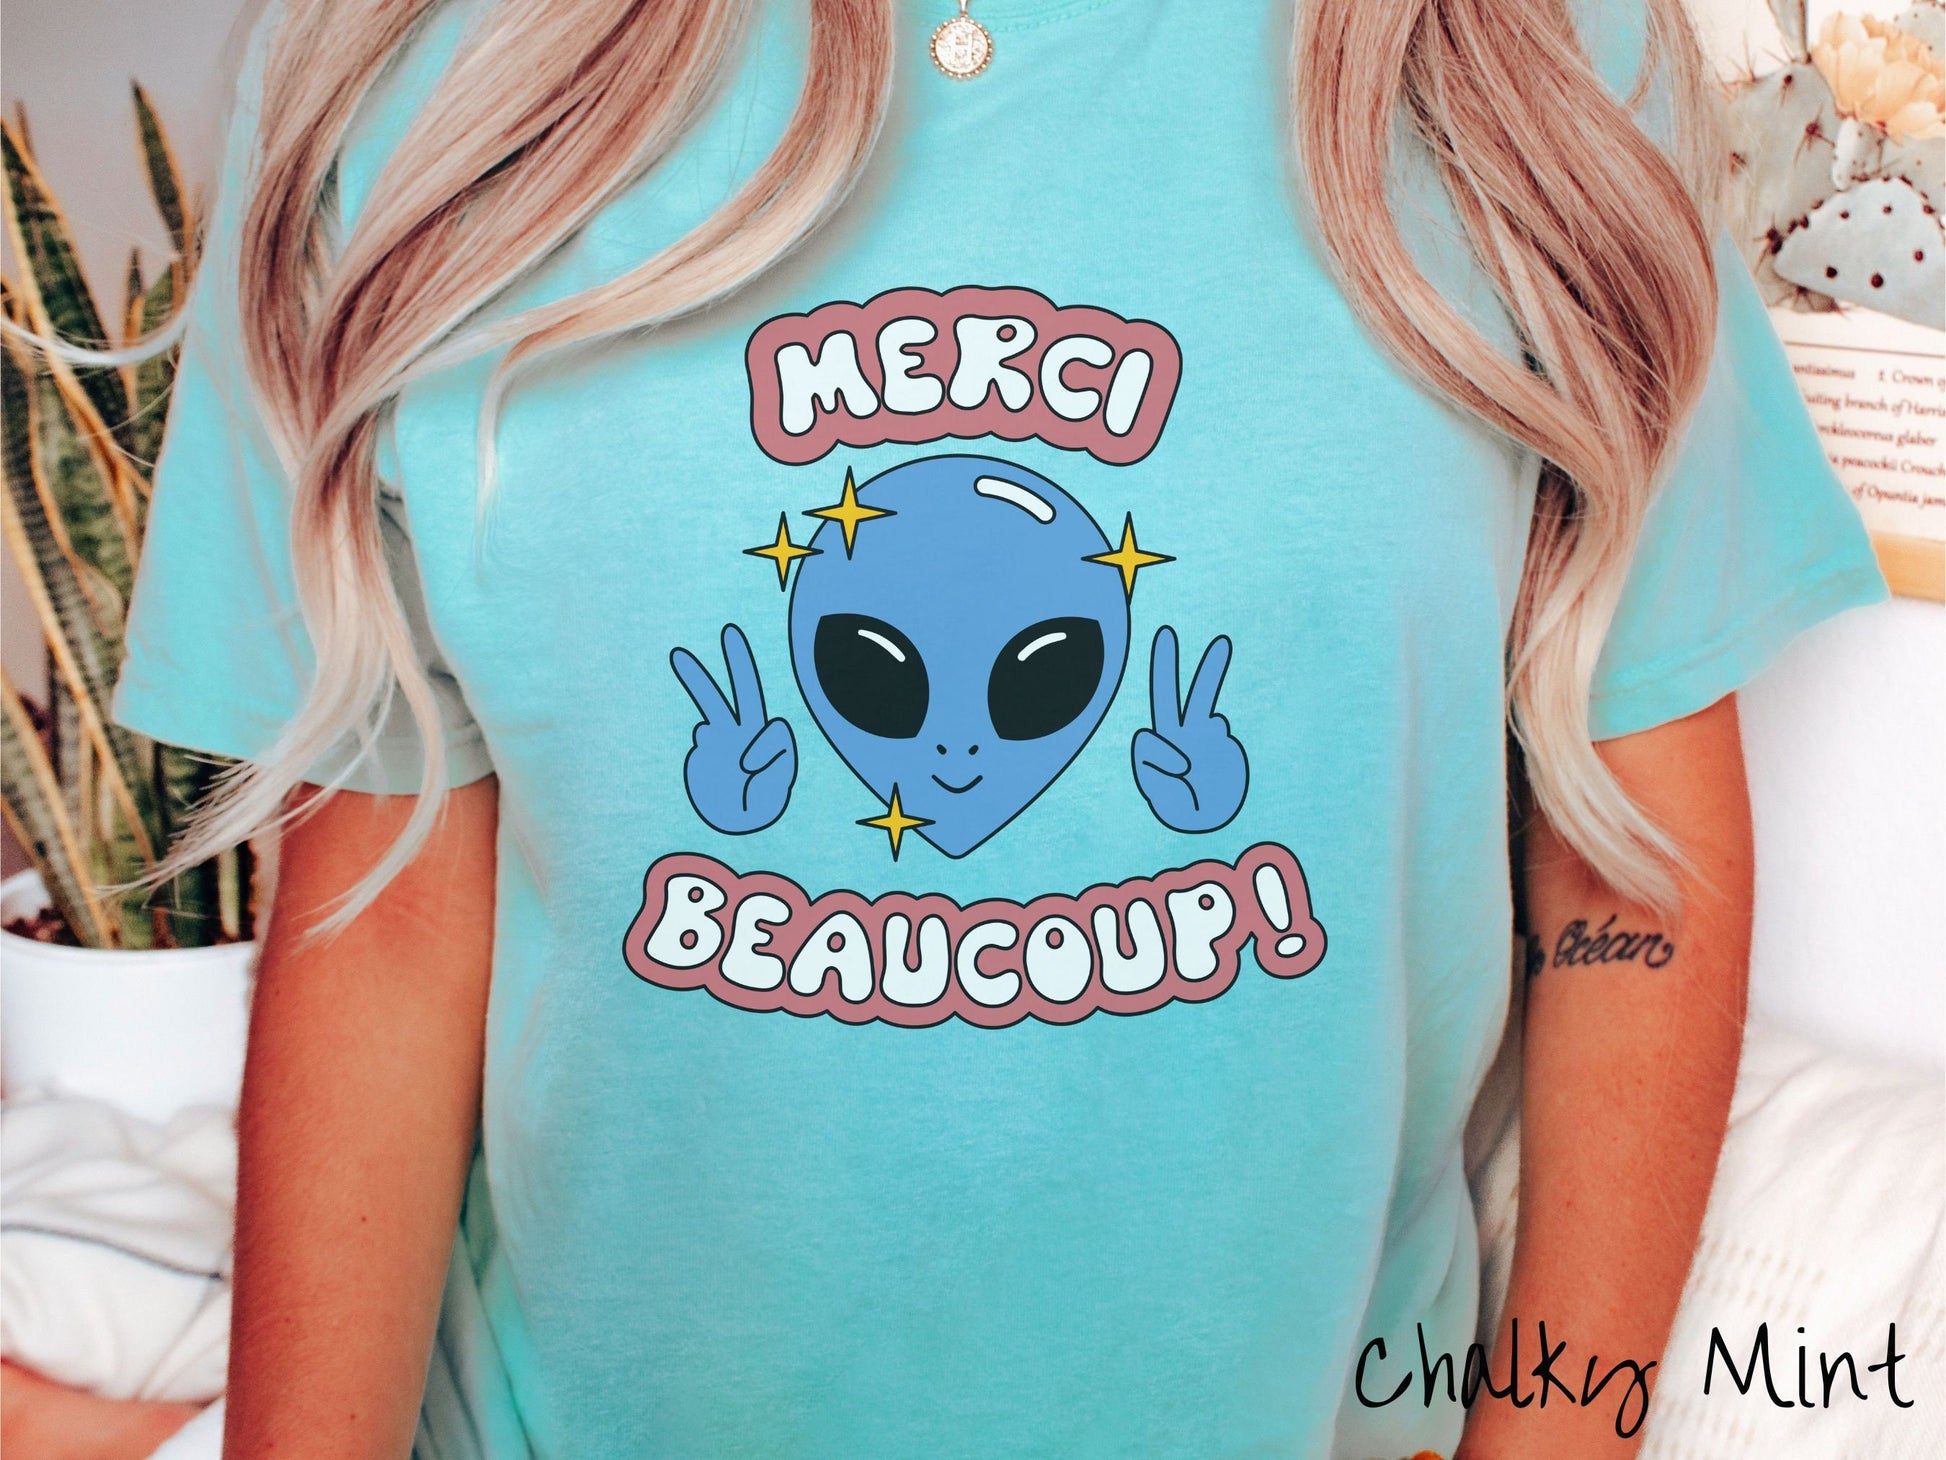 A woman wearing a cute, vintage chalky mint colored Comfort Colors shirt with the text Merci Beaucoup! in white and maroon colored font. In between that is a blue alien with large black eyes smiling and holding up two peace signs.